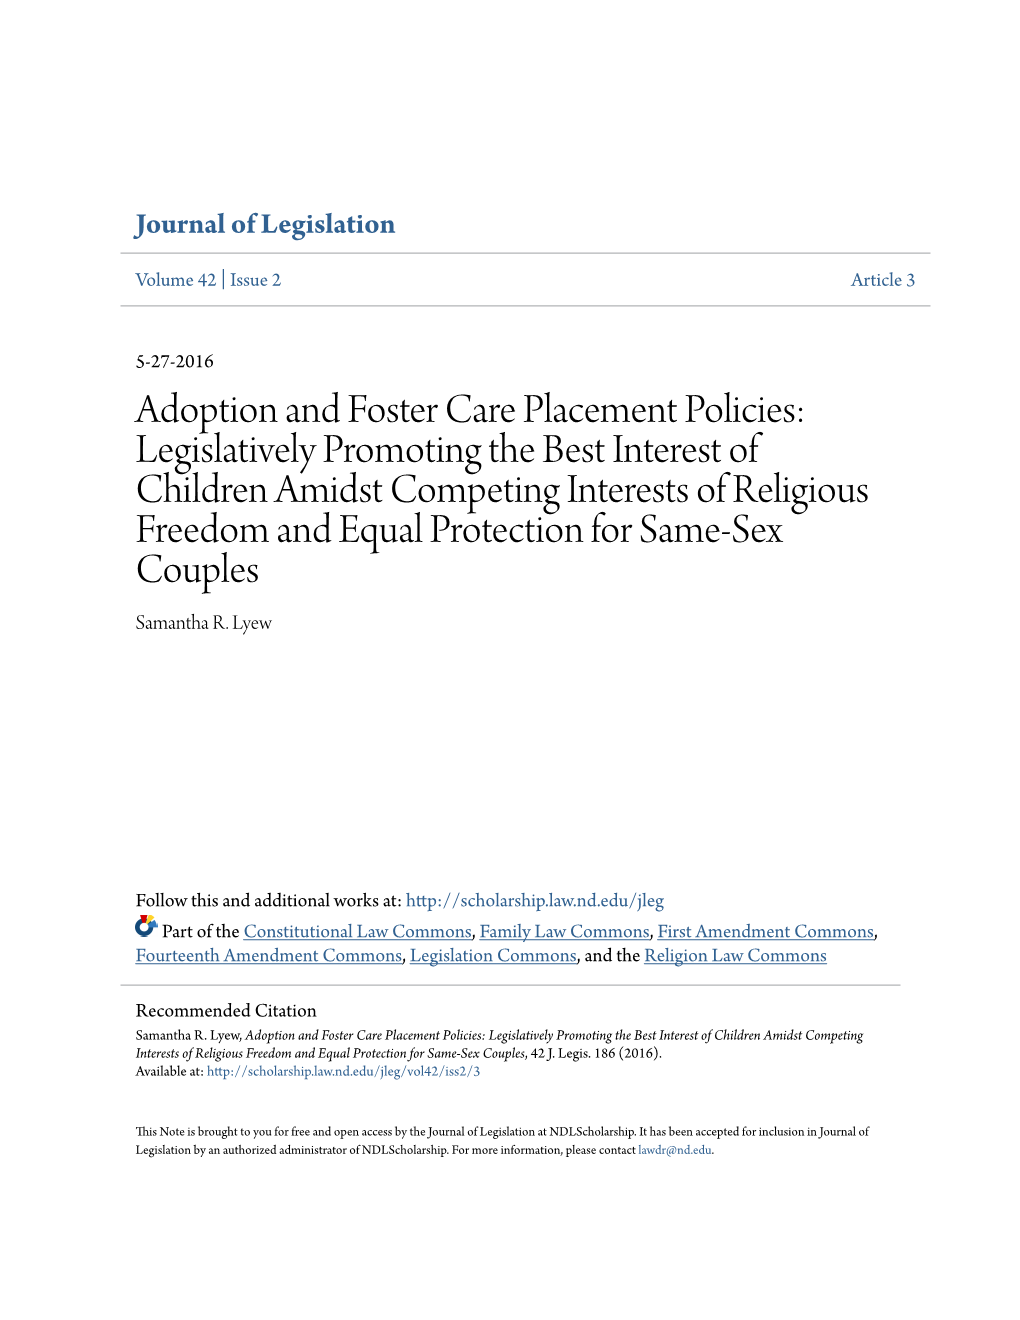 Adoption and Foster Care Placement Policies